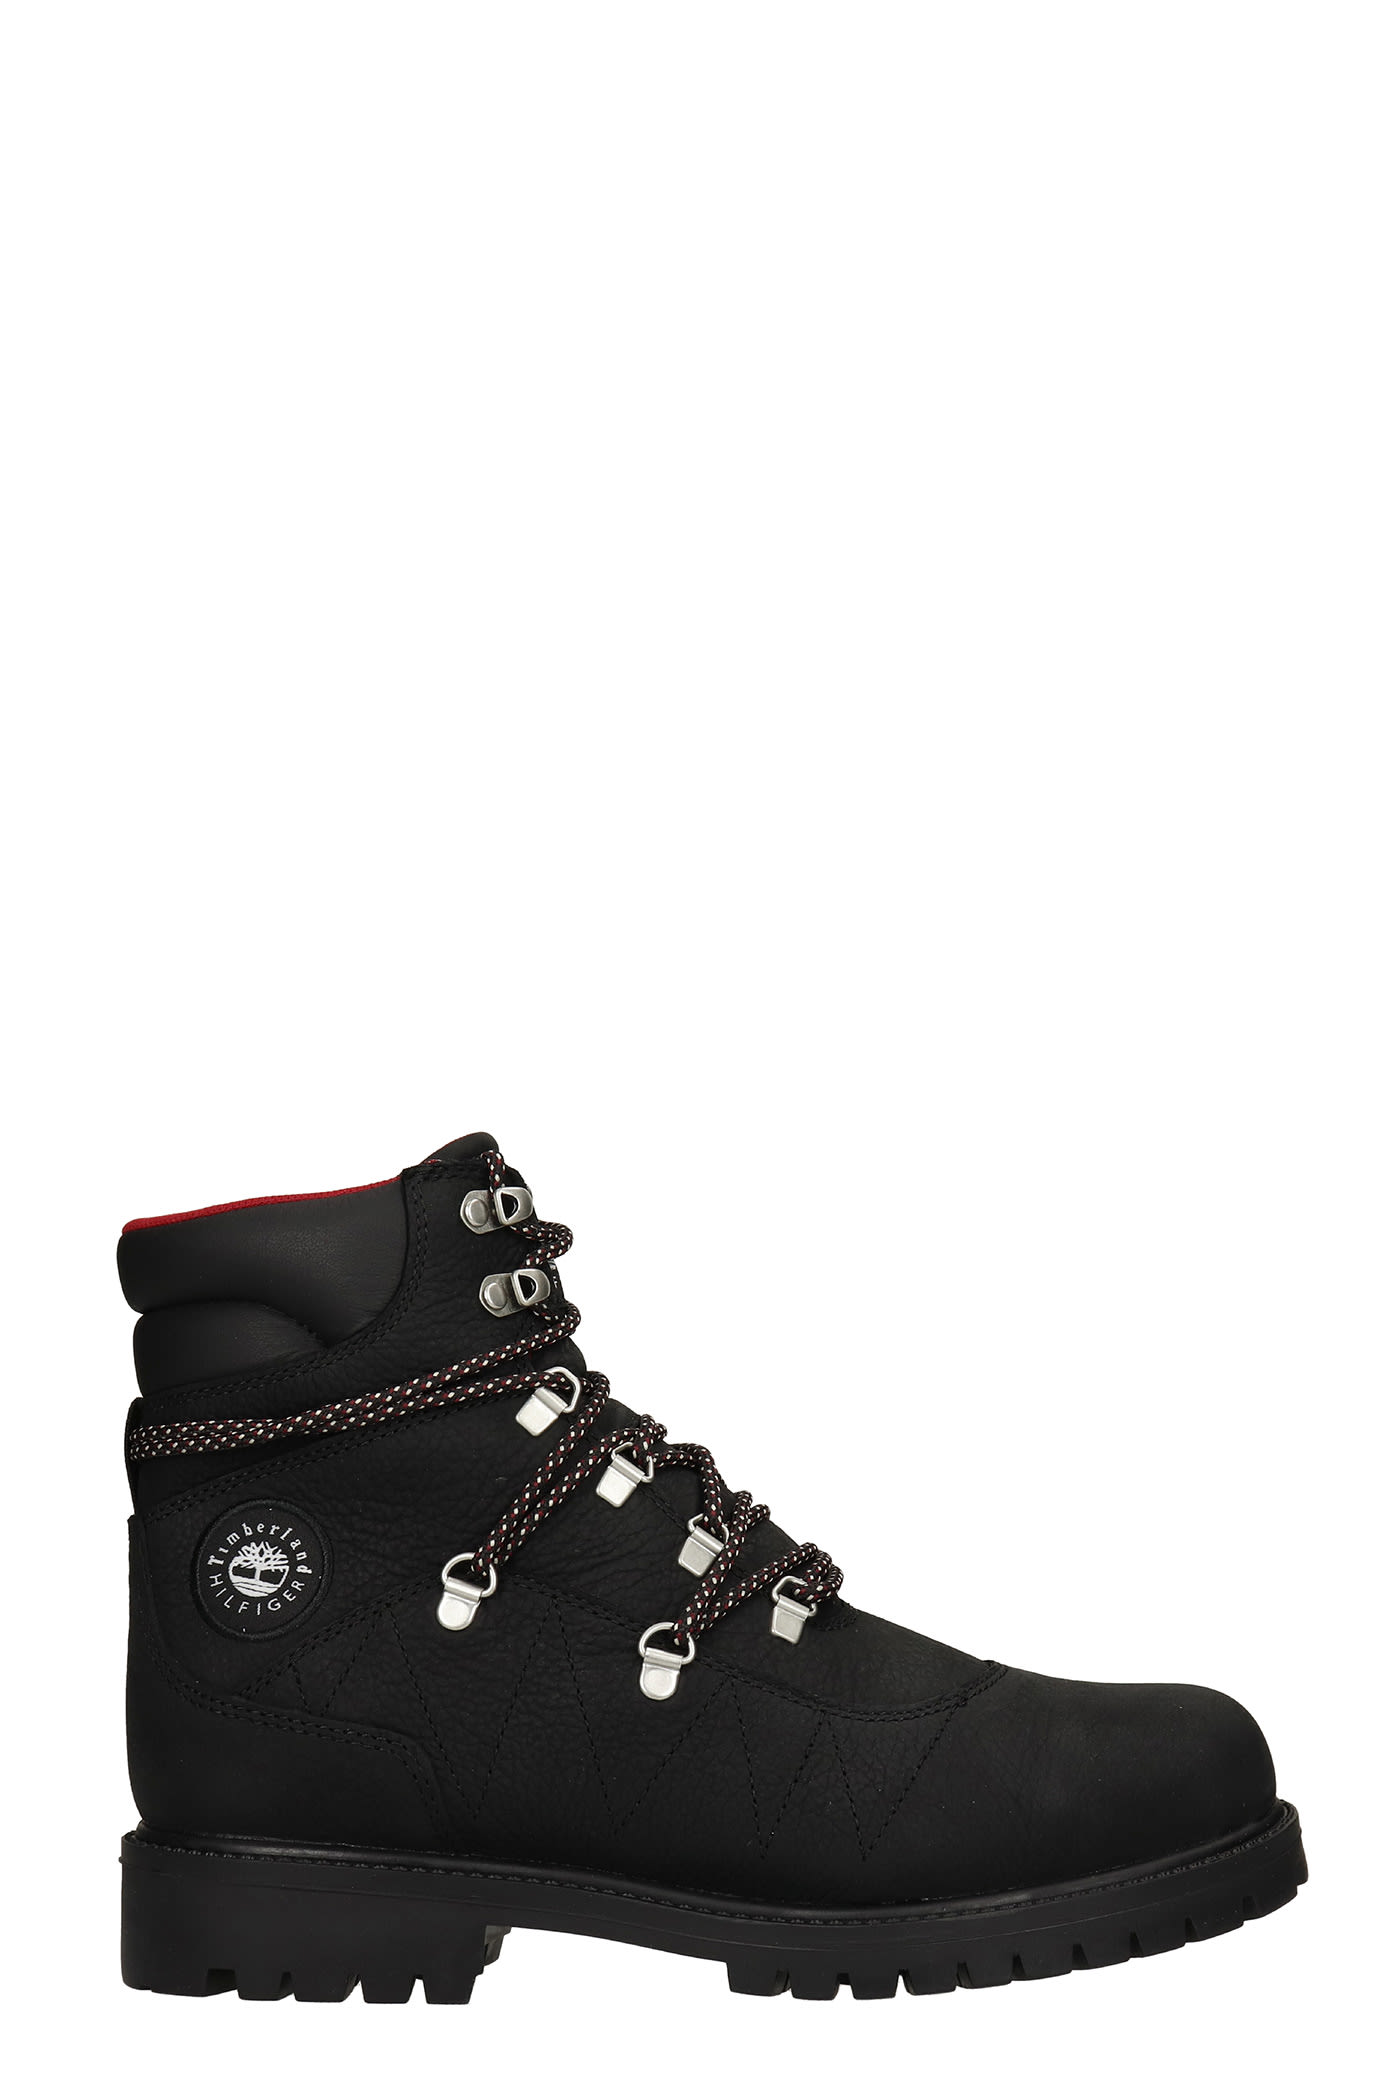 Timberland Combat Boots In Black Leather